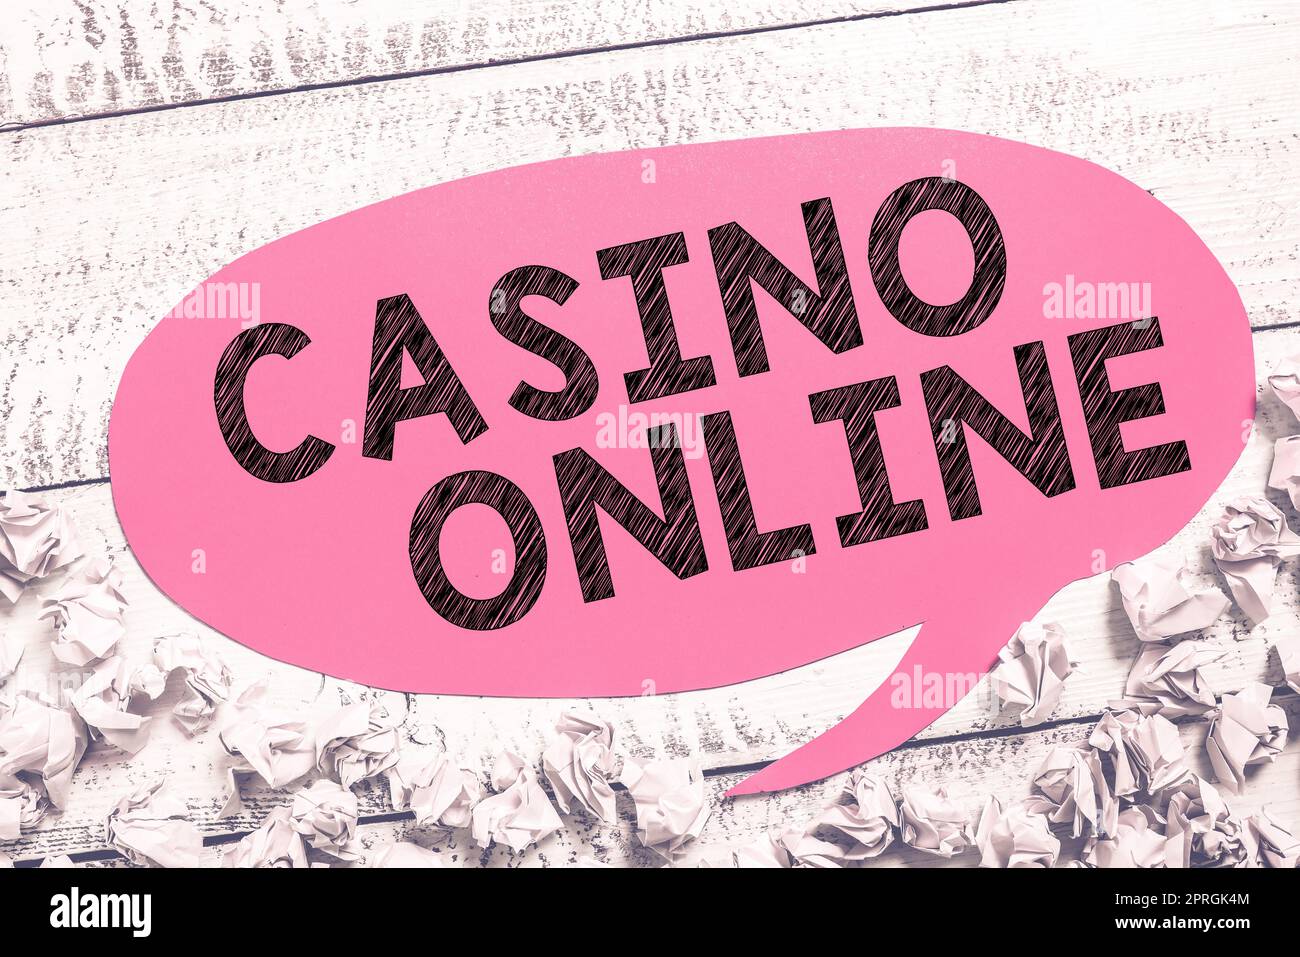 Text sign showing Casino Online, Business approach Computer Poker Game Gamble Royal Bet Lotto High Stakes Stock Photo